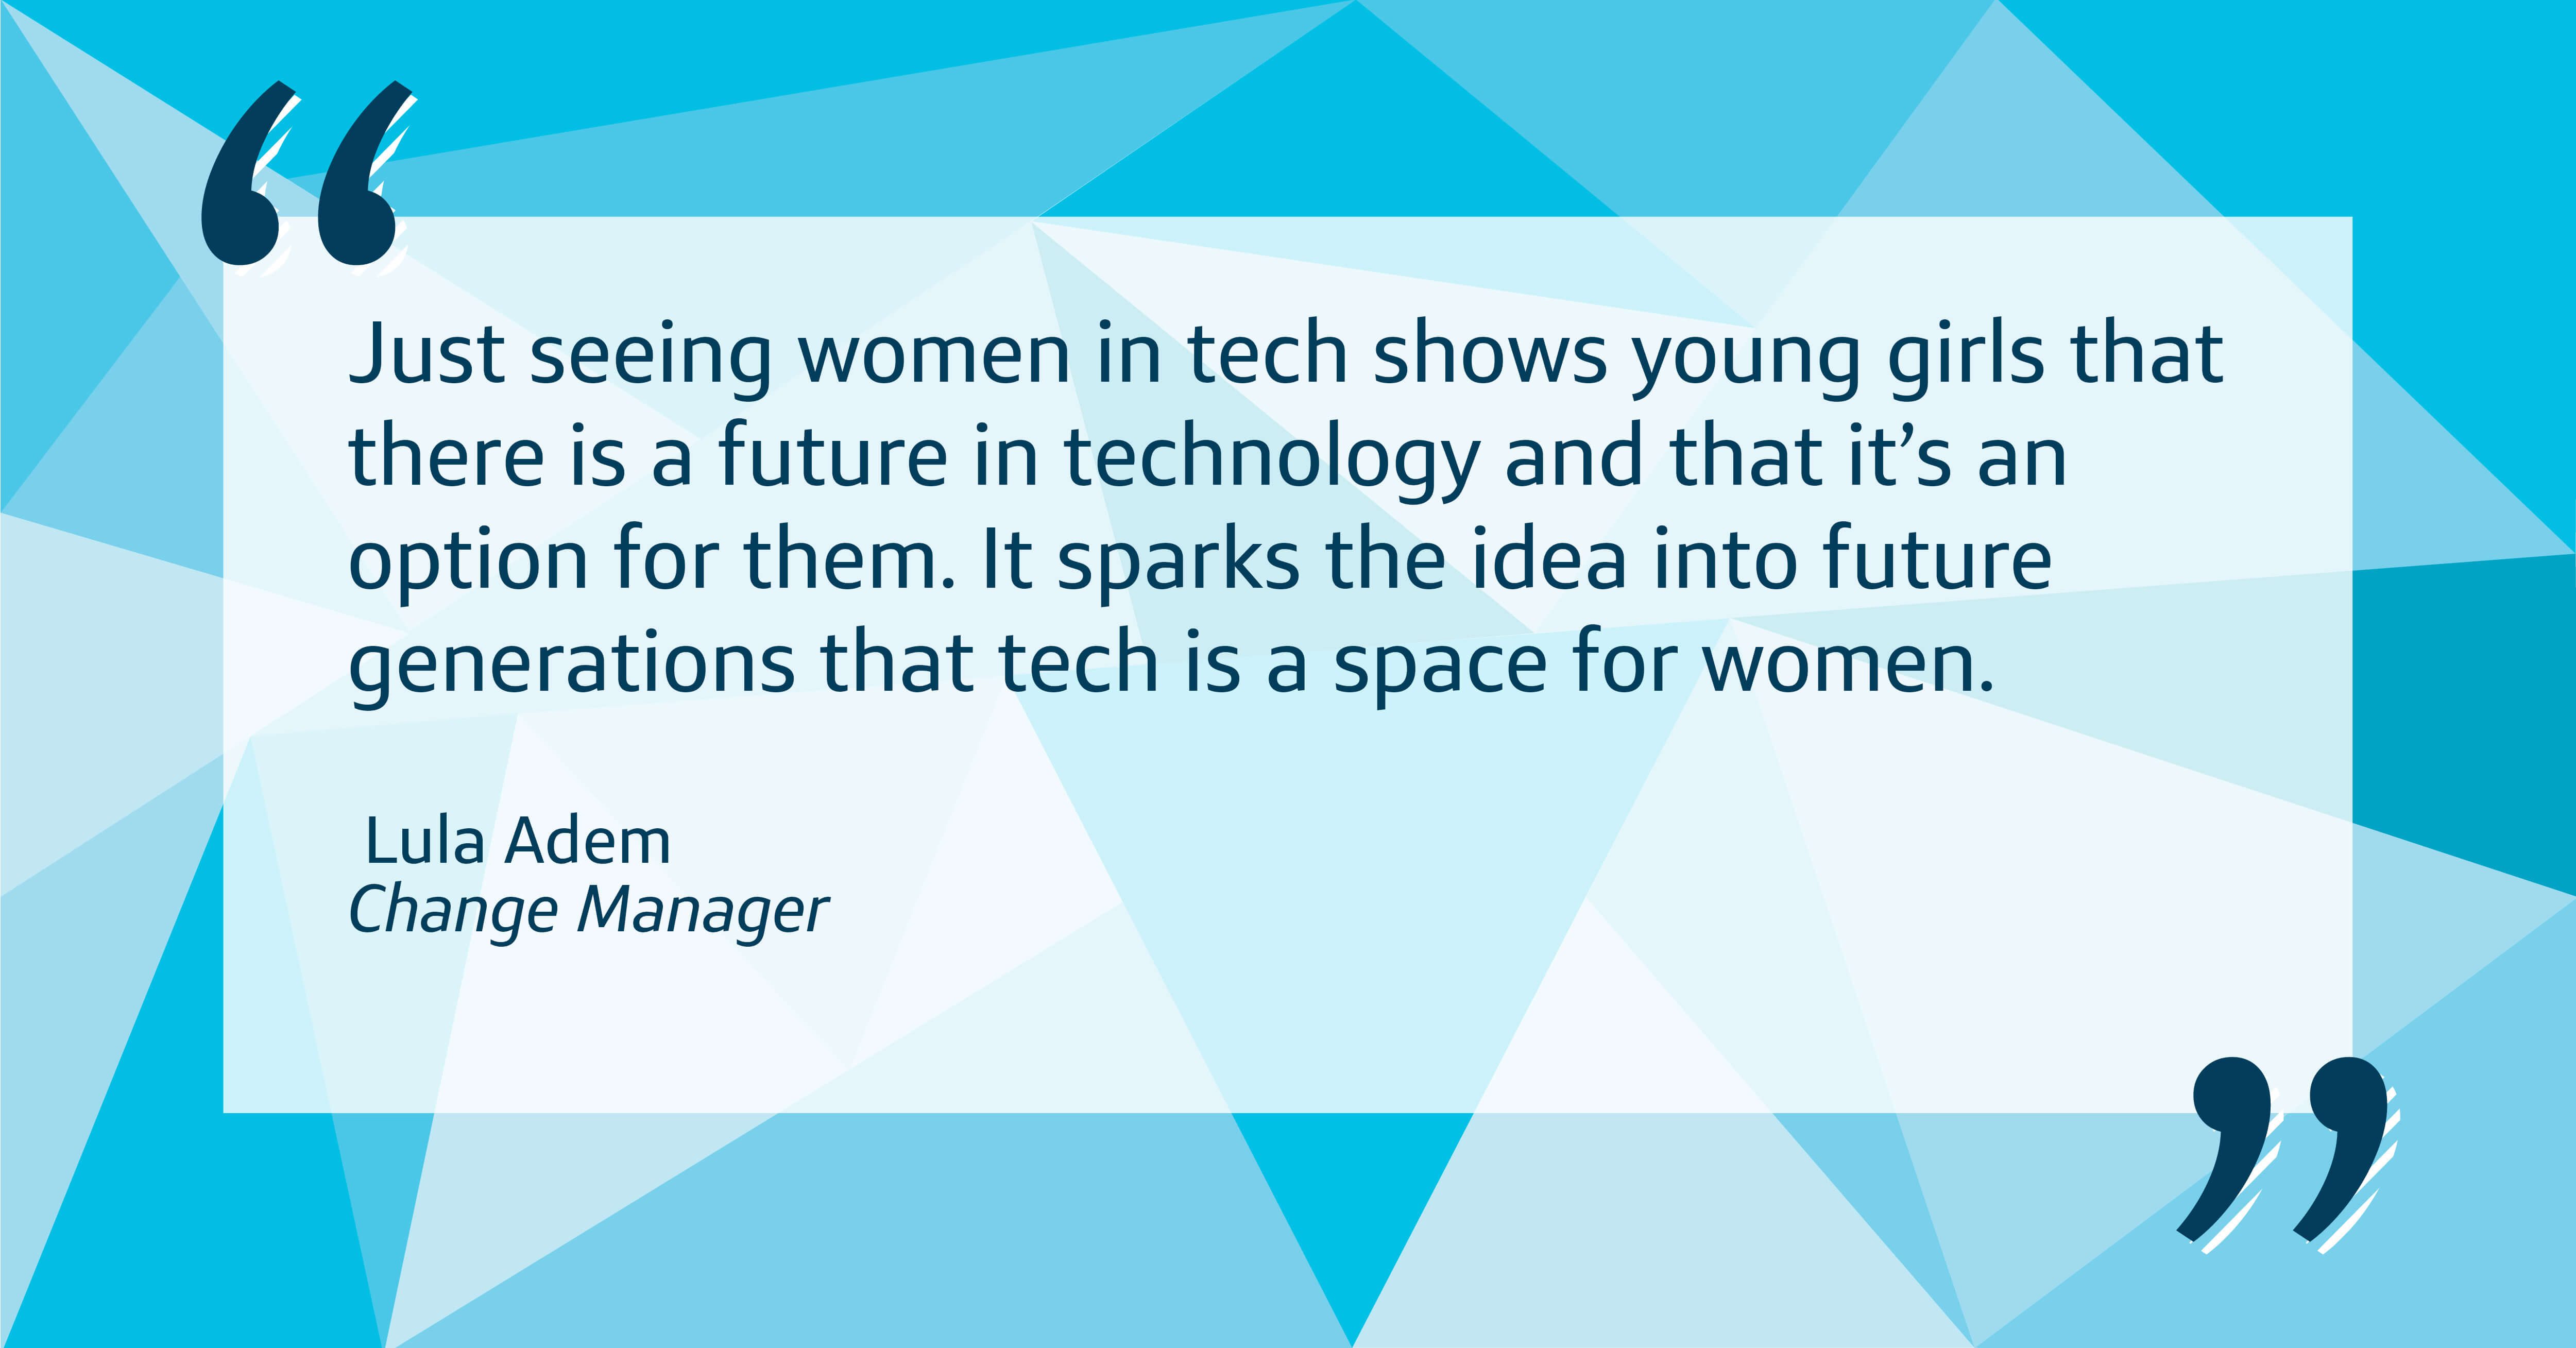 Just seeing women in tech shows young girls that there is a future in technology and that it’s an option for them. It sparks the idea into future generations that tech is a space for women.